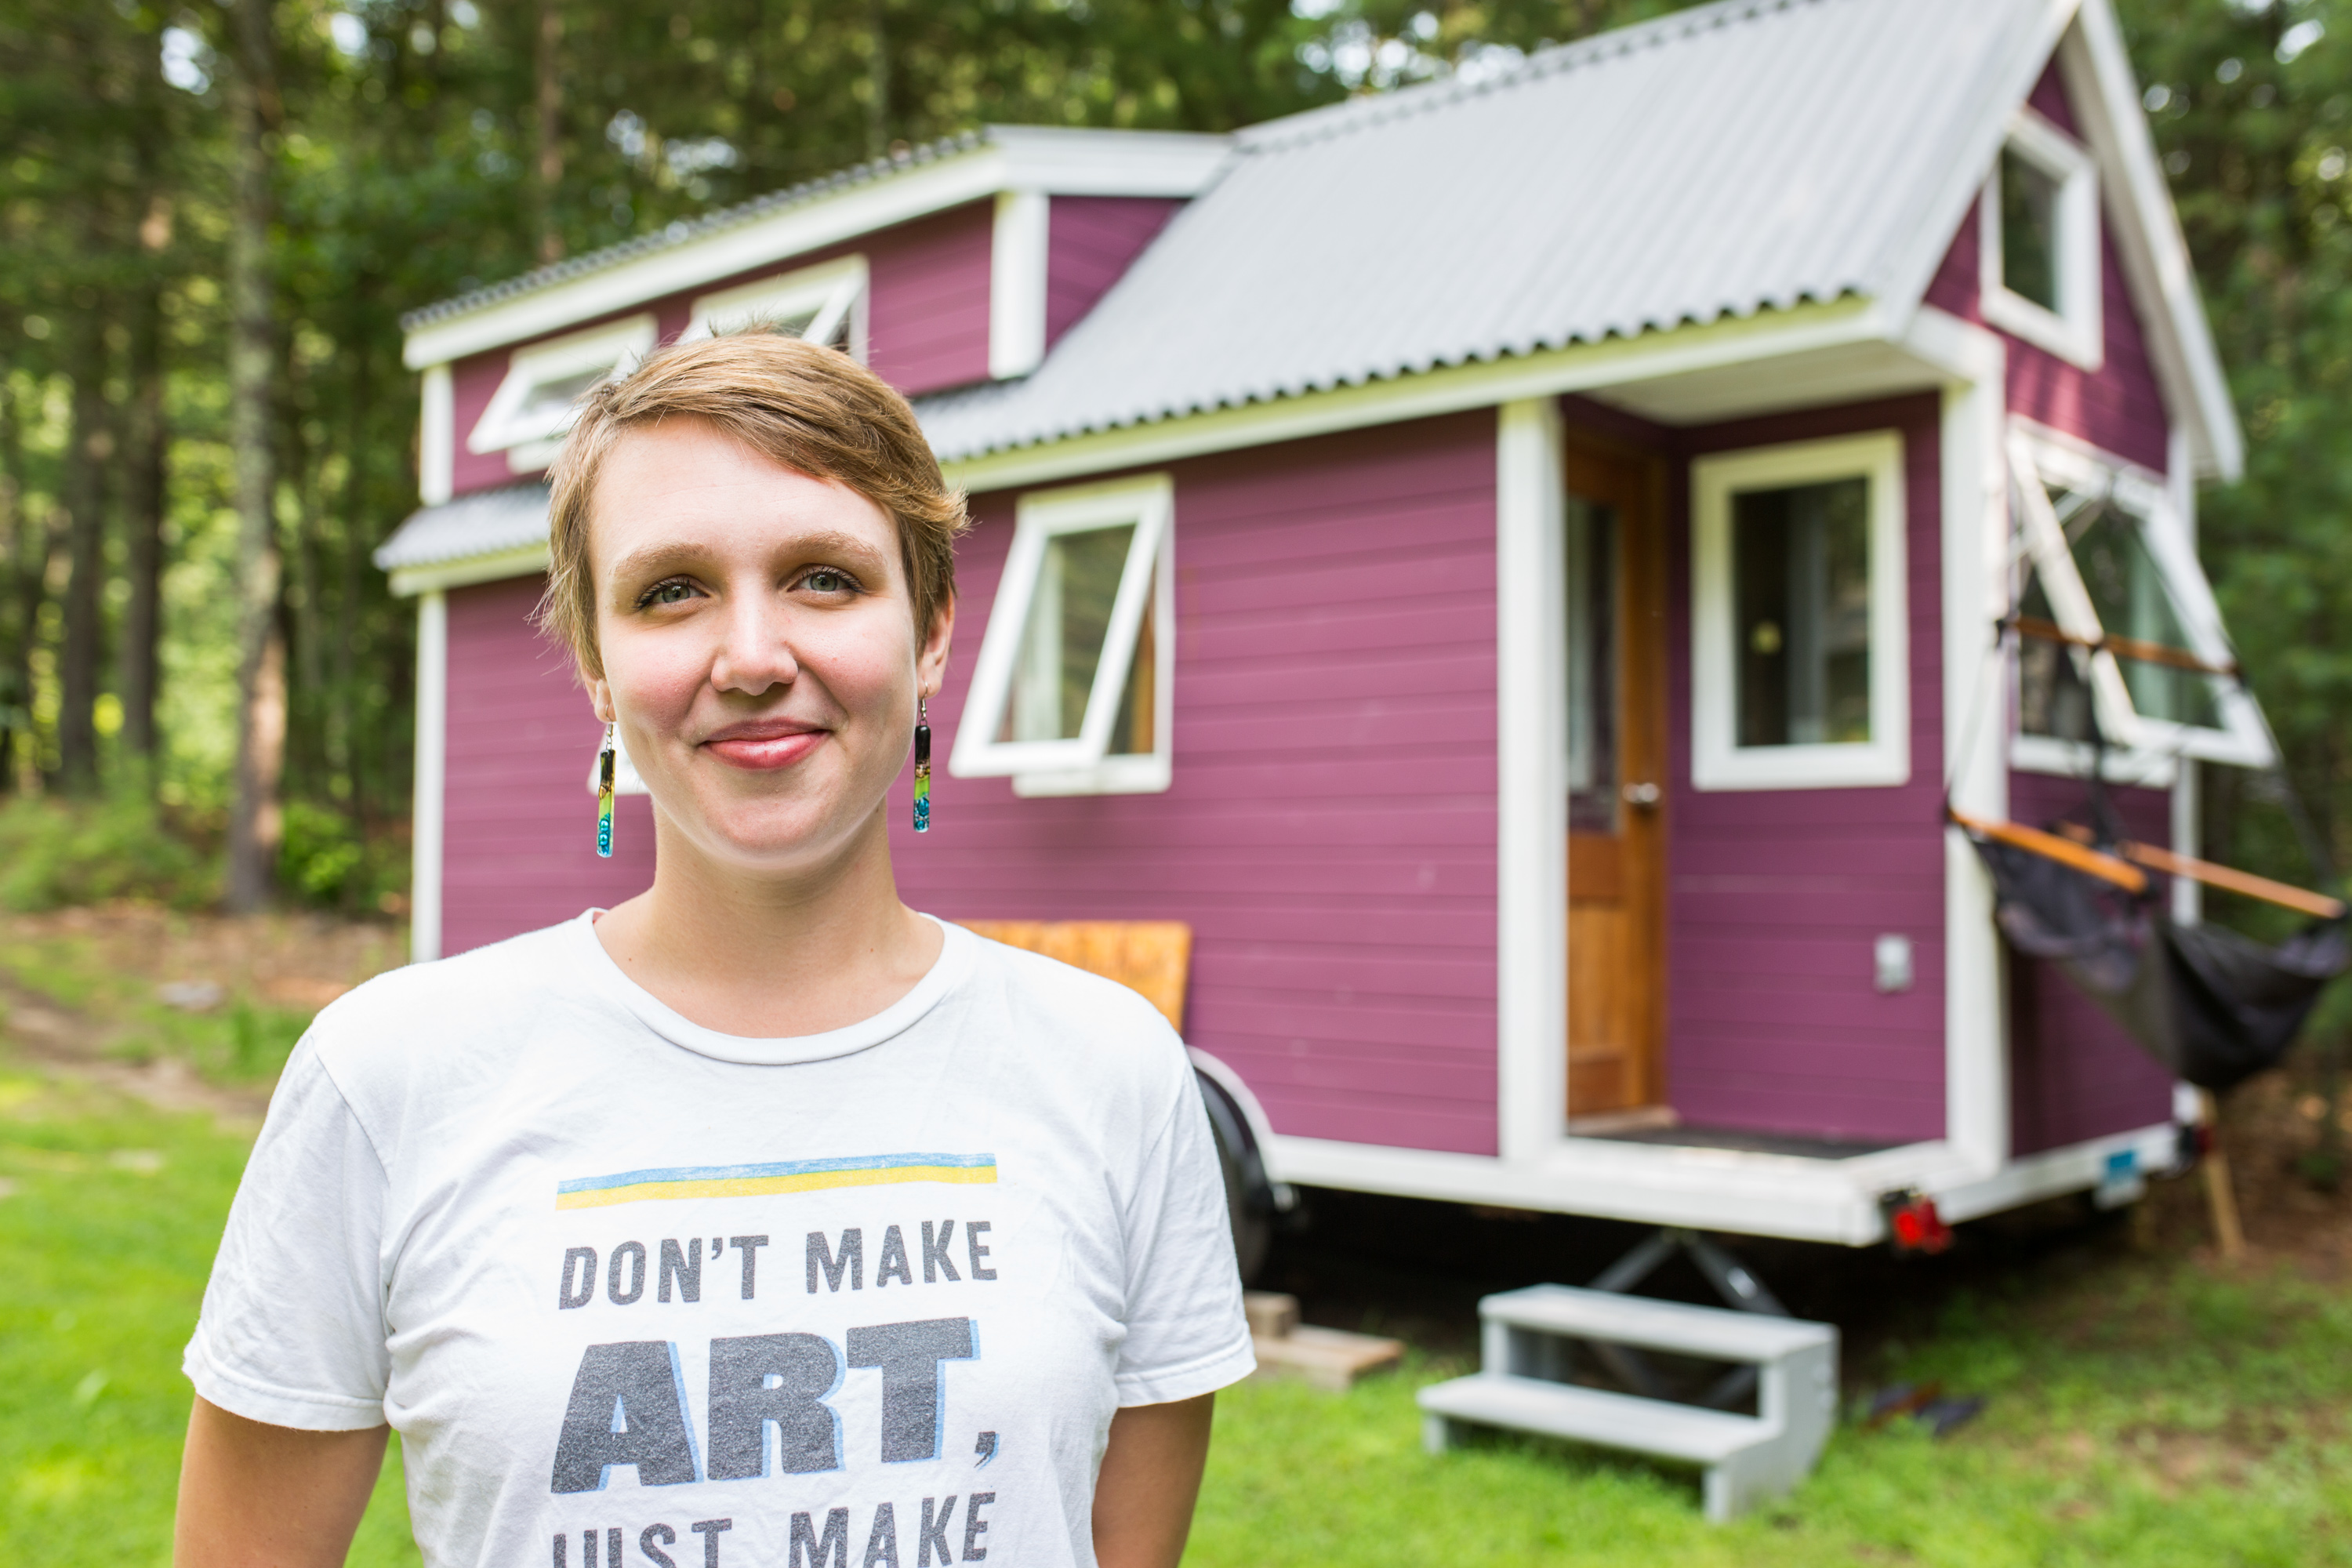 Miranda Aisling stands outside of her purple tiny house nestled against a backdrop of trees.